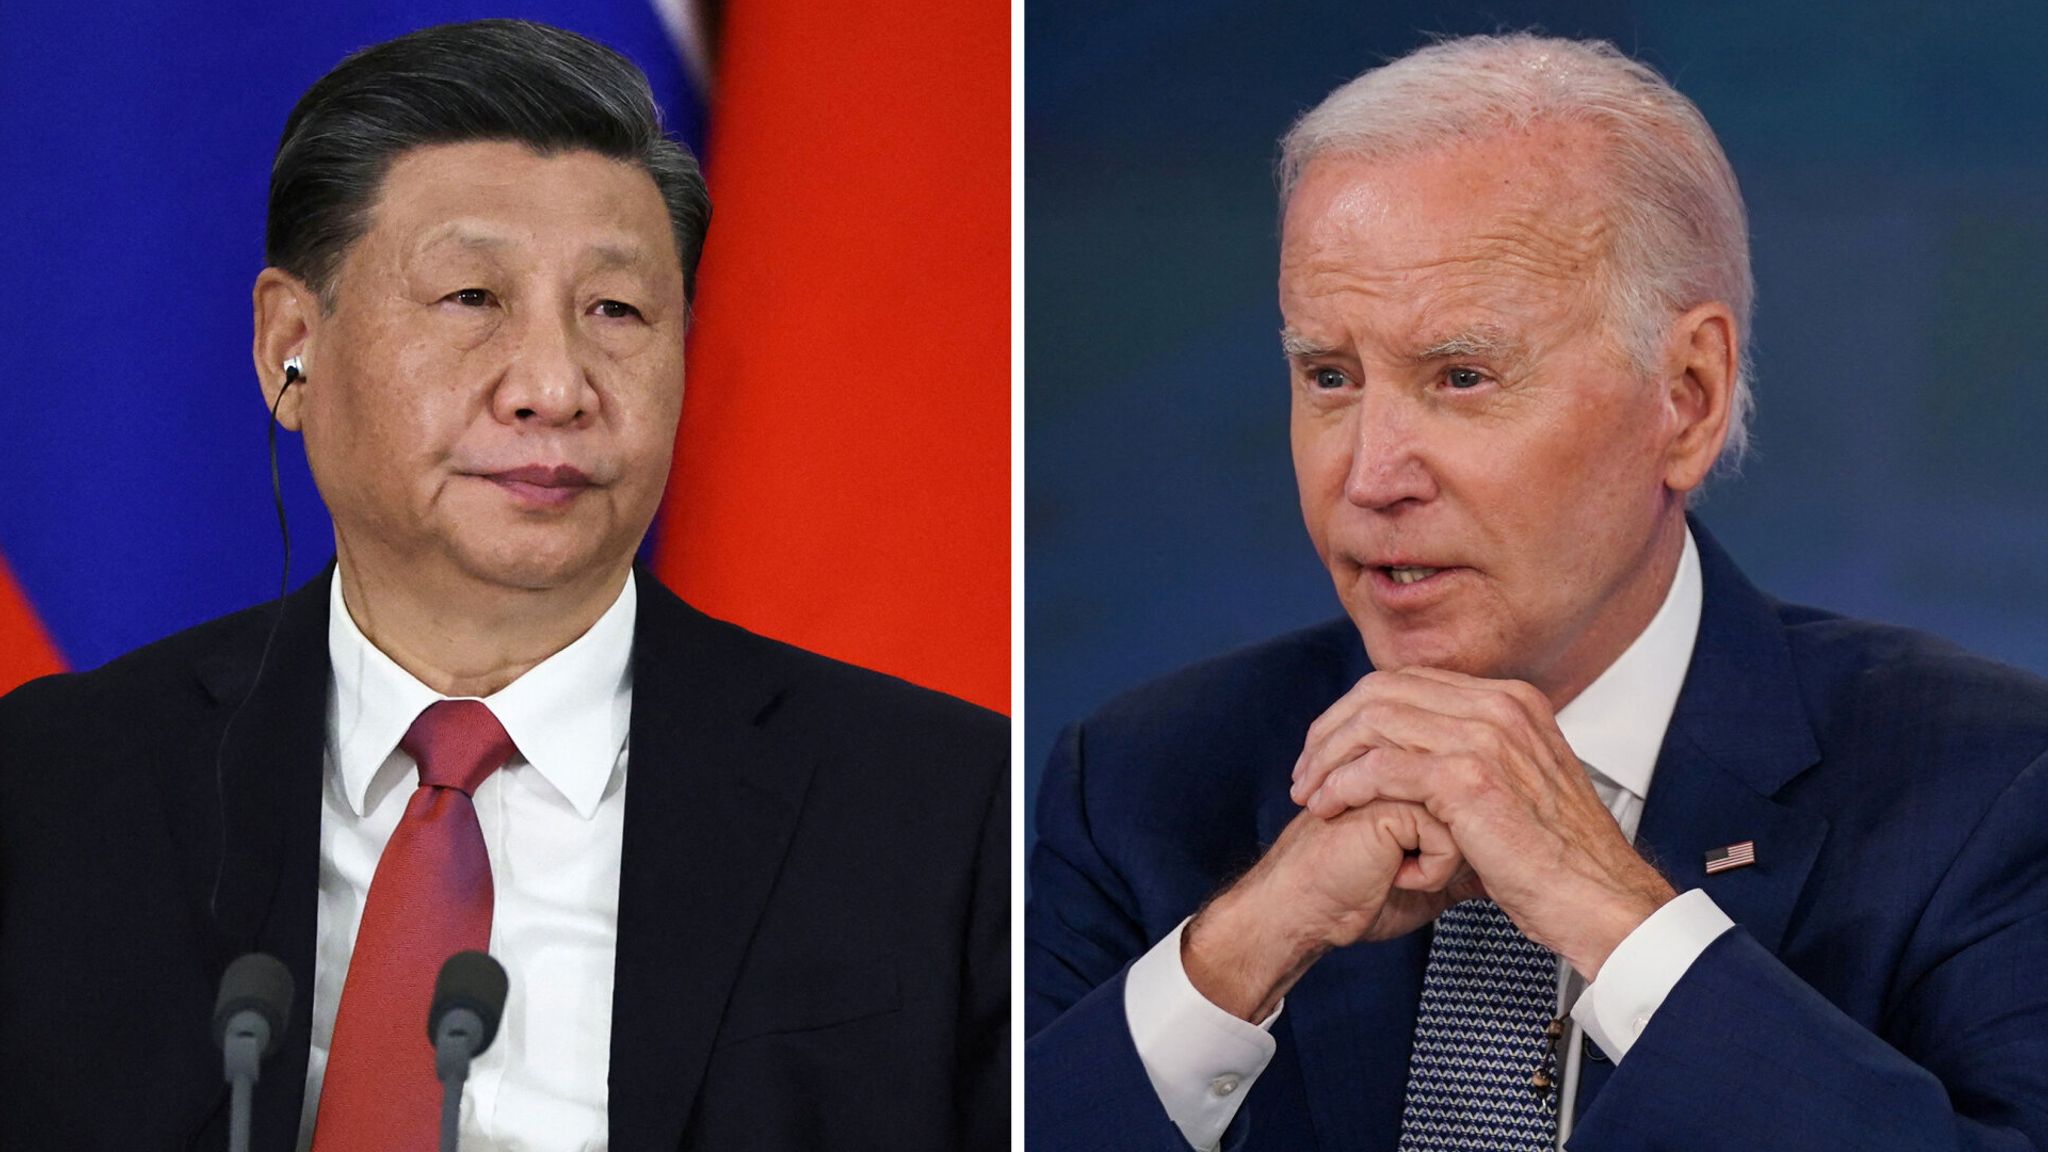 China lashes out at Biden over his 'absurd and irresponsible' description  of Xi Jinping | World News | Sky News